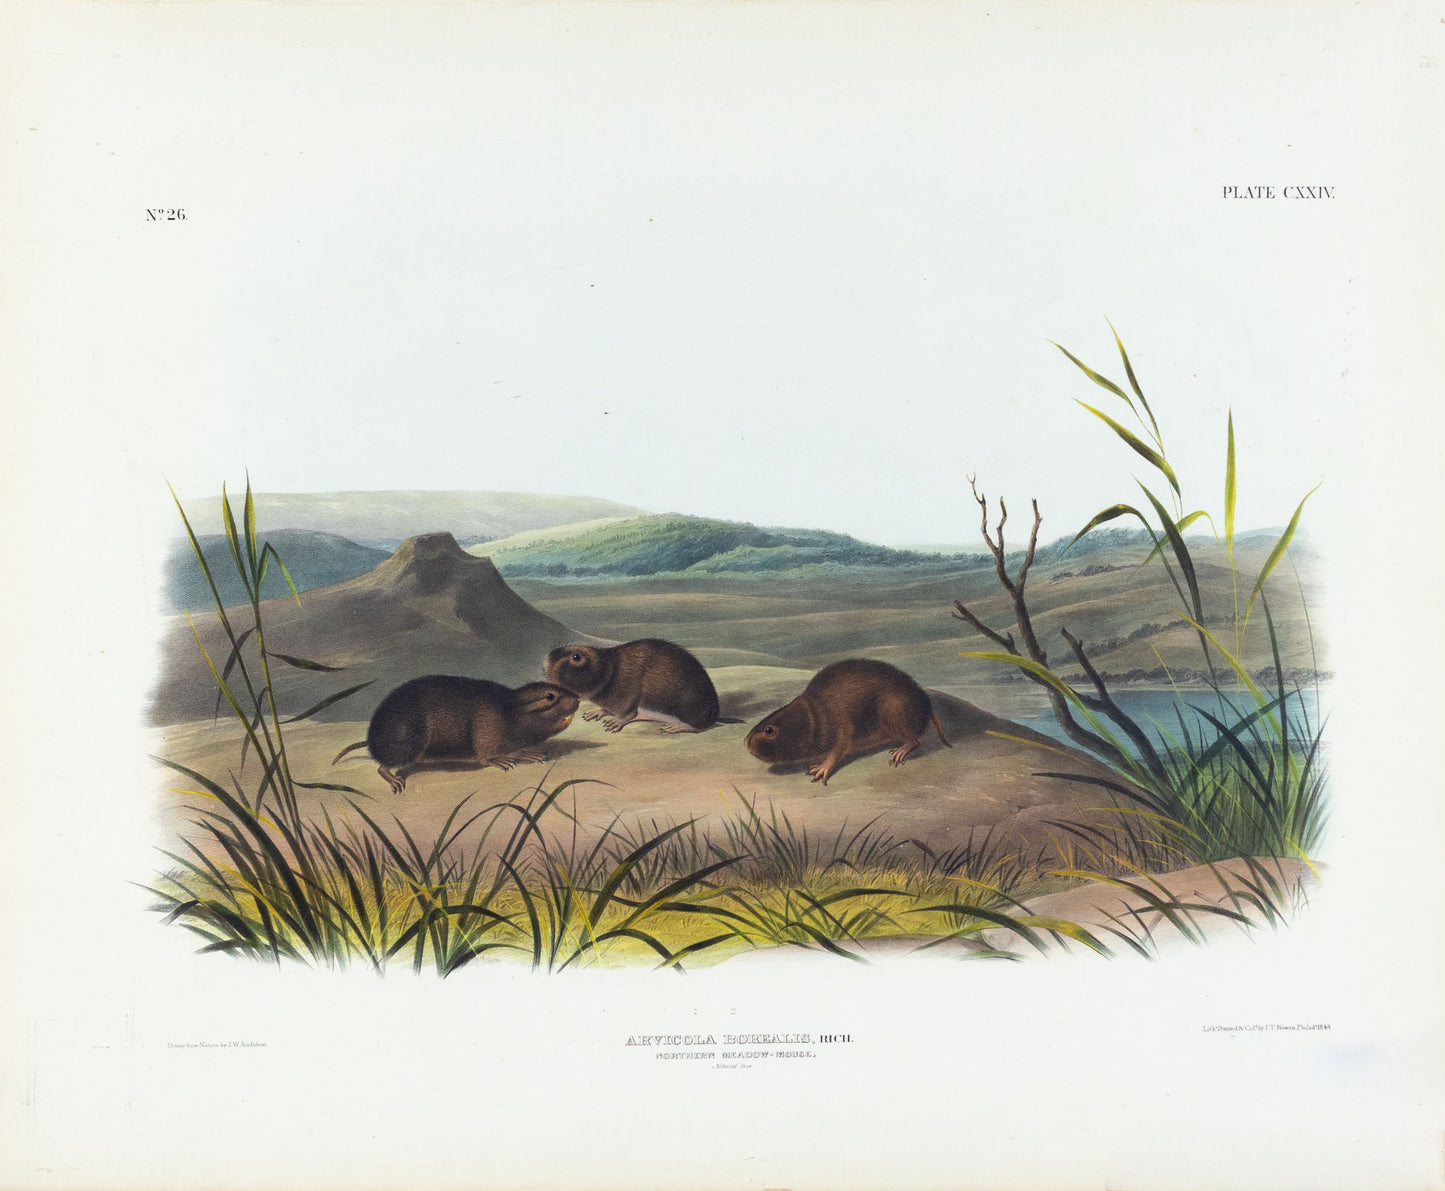 AUDUBON, John James (1785-1851) Northern Meadow-Mouse, Plate 124 [incorrect plate number]